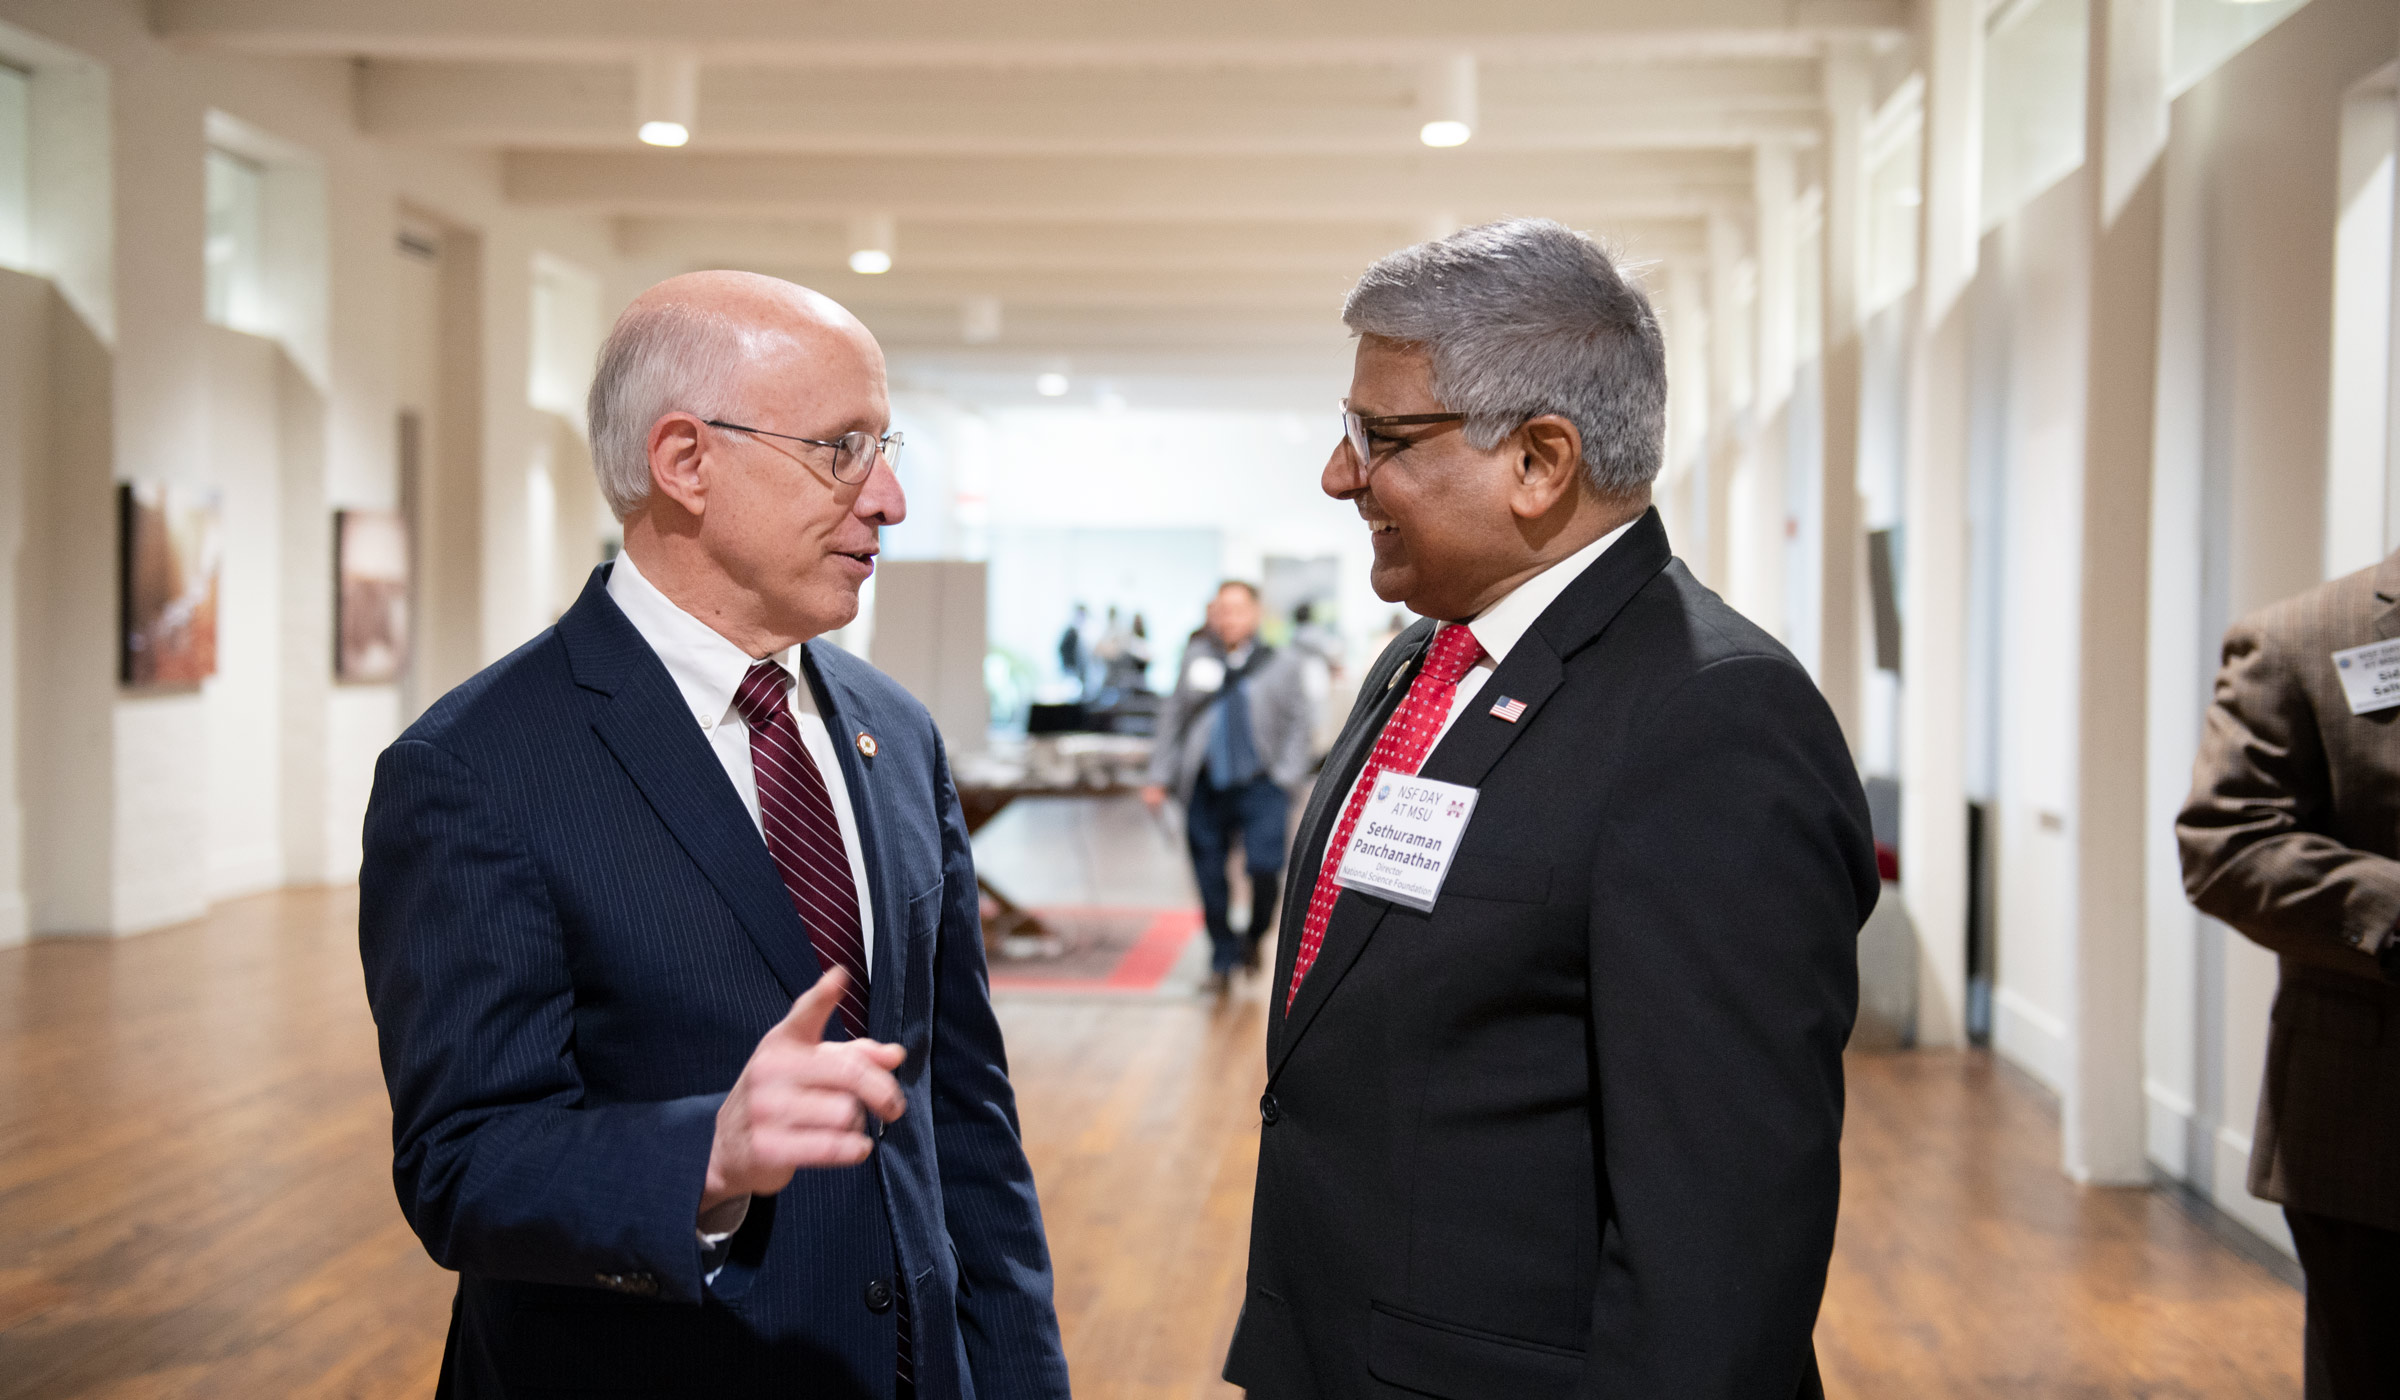 Provost Shaw and NSF Director Panchananthan visit in the hall of The Mill before the NSF Day program.